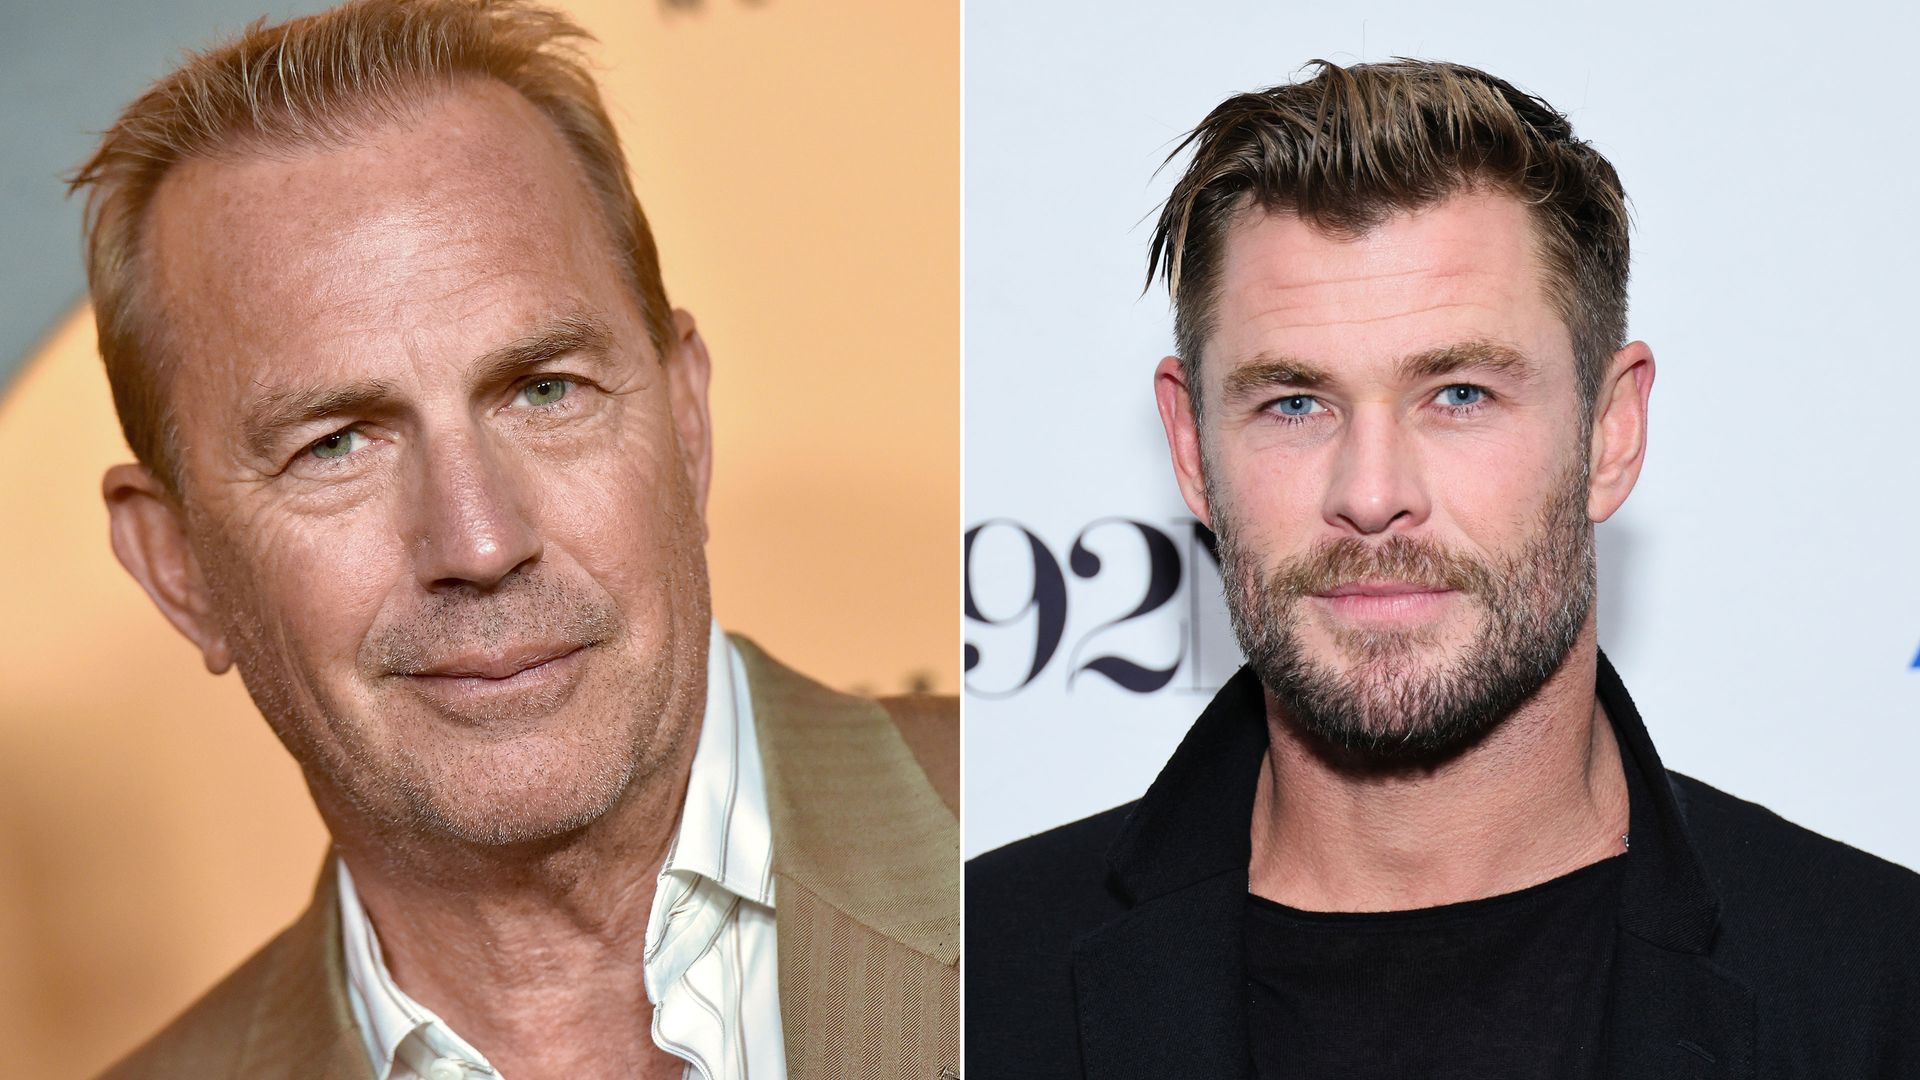 Kevin Costner refused to cast Chris Hemsworth in new movie - and cast himself instead